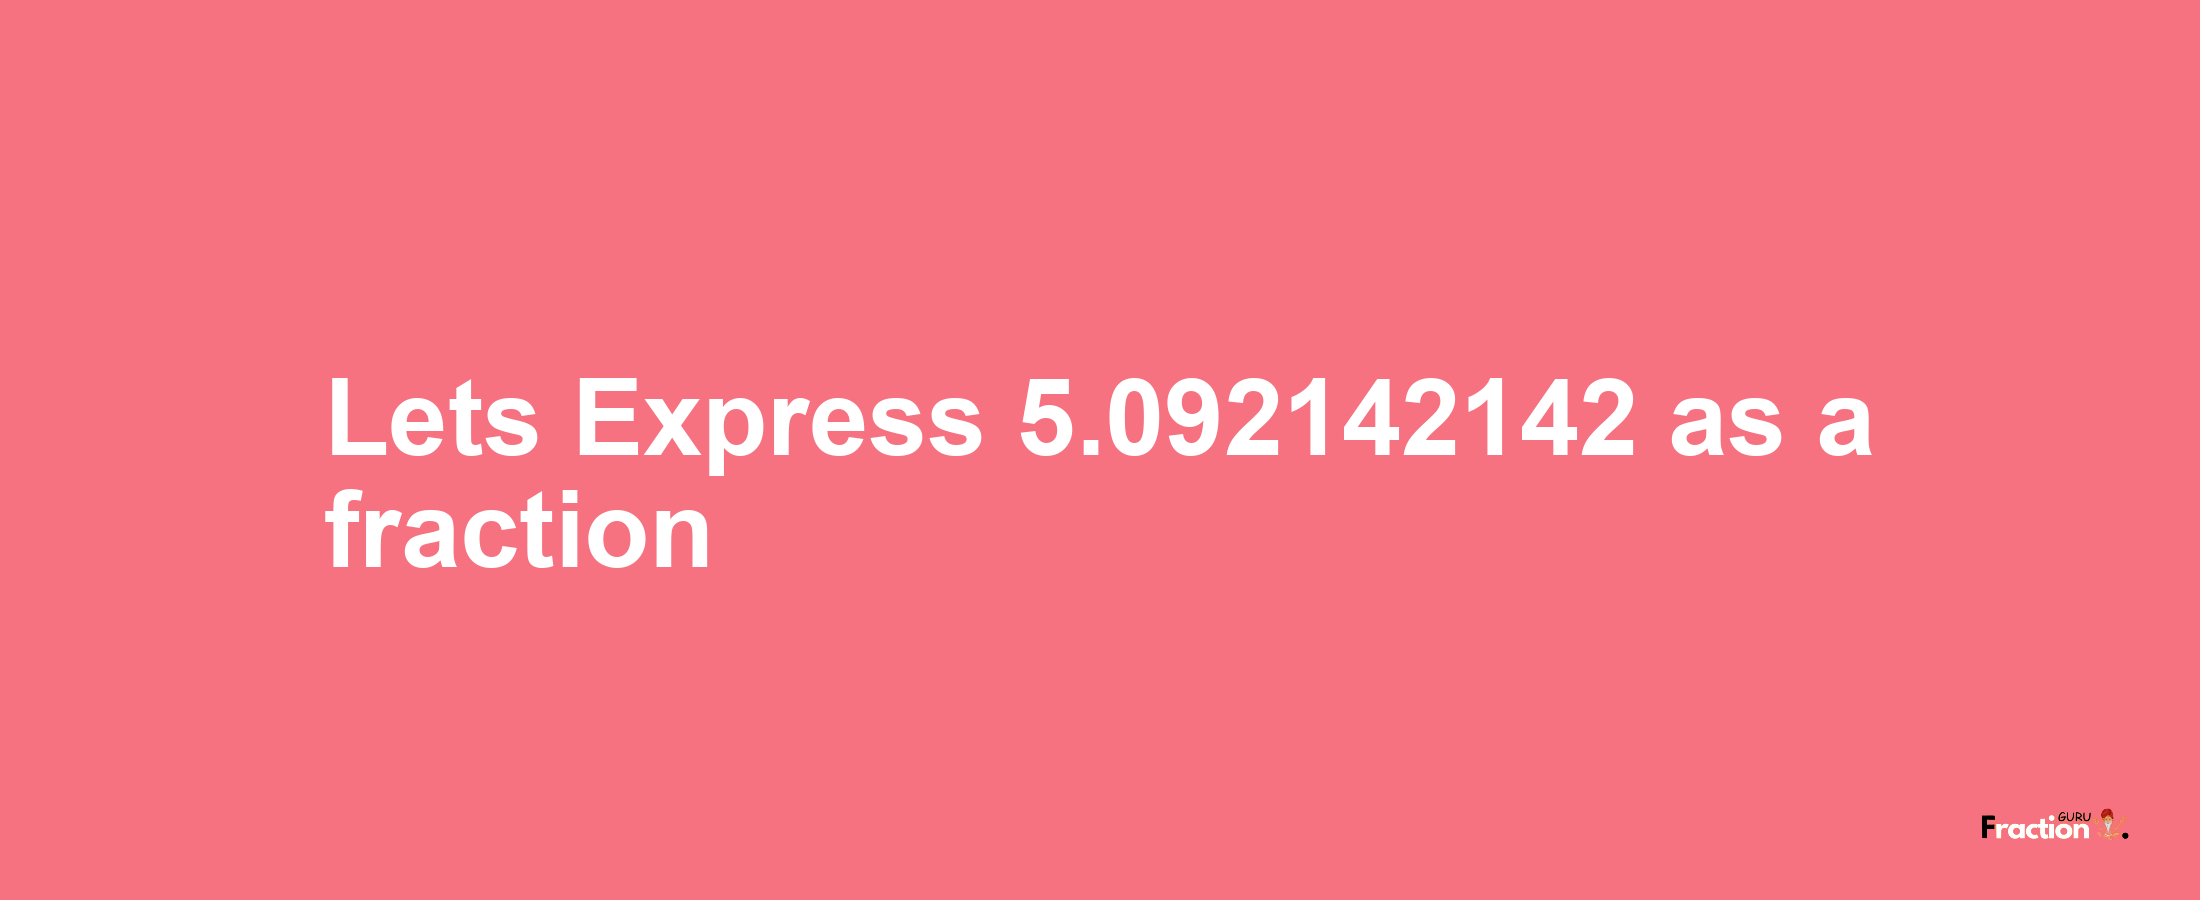 Lets Express 5.092142142 as afraction